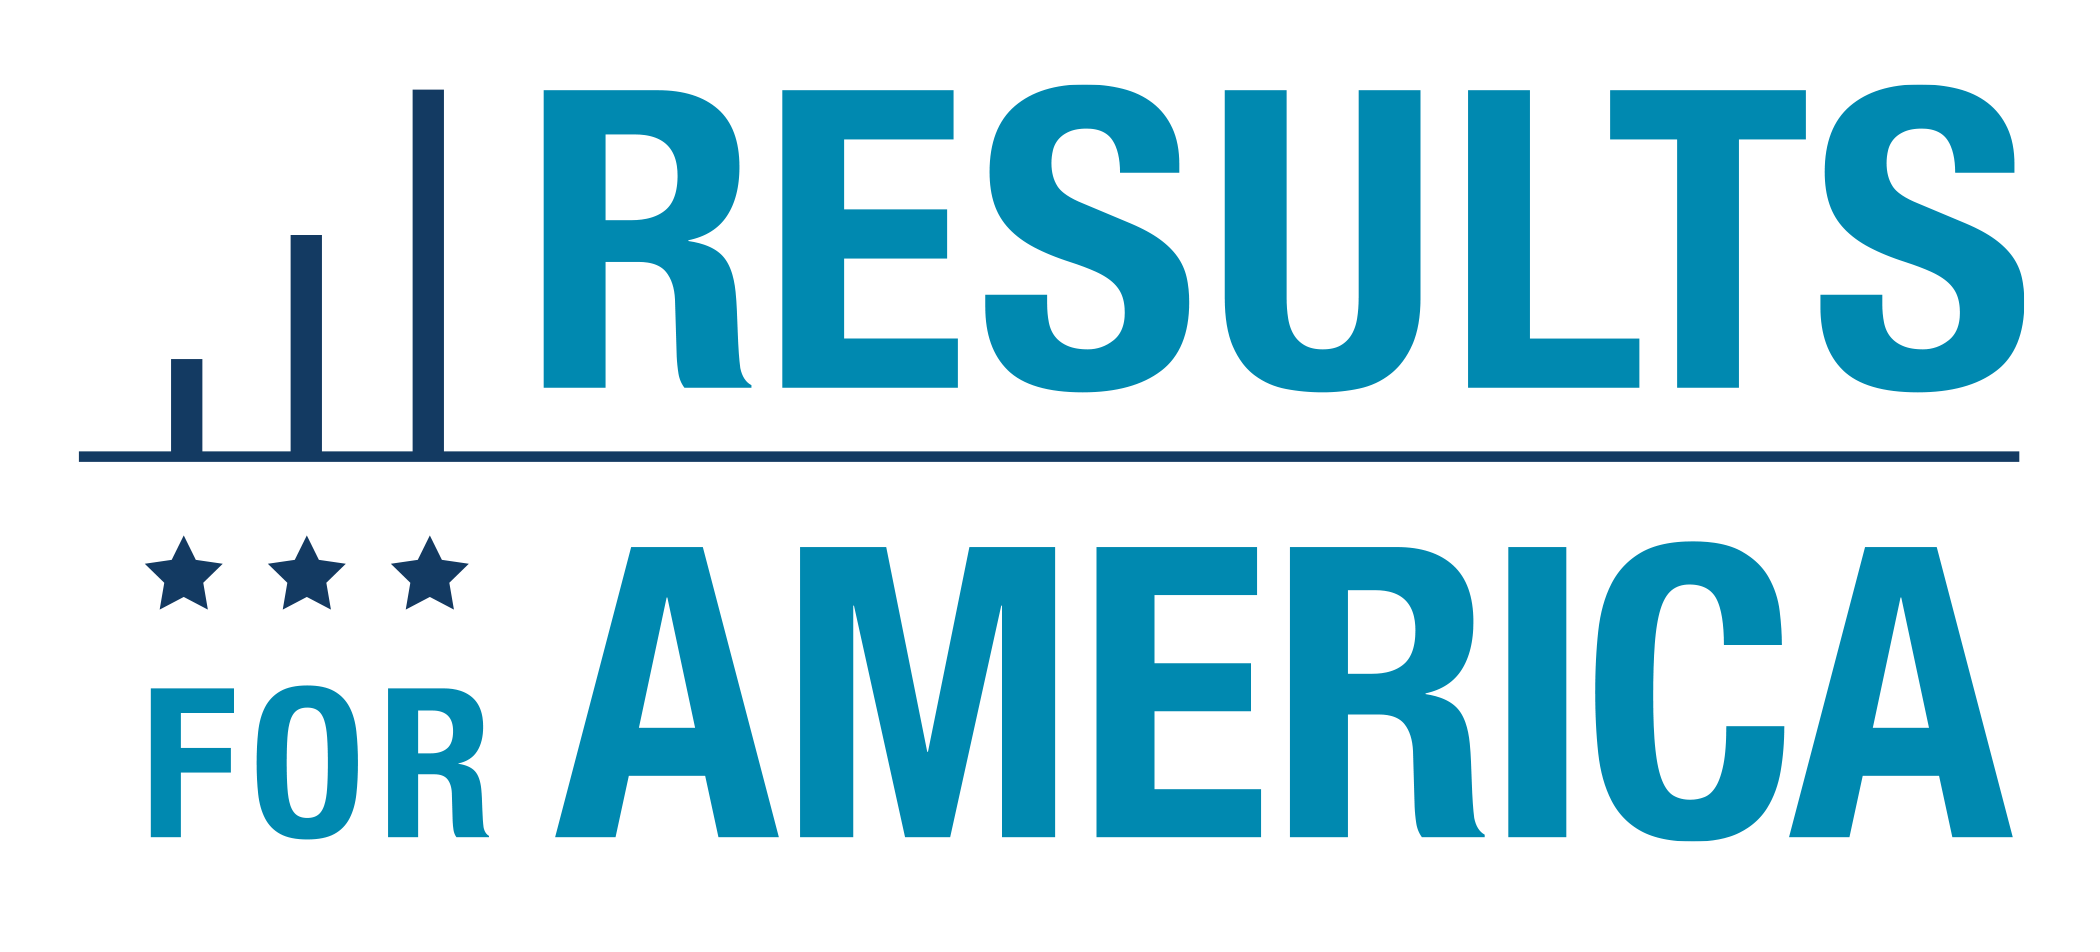 Results-for-America.png